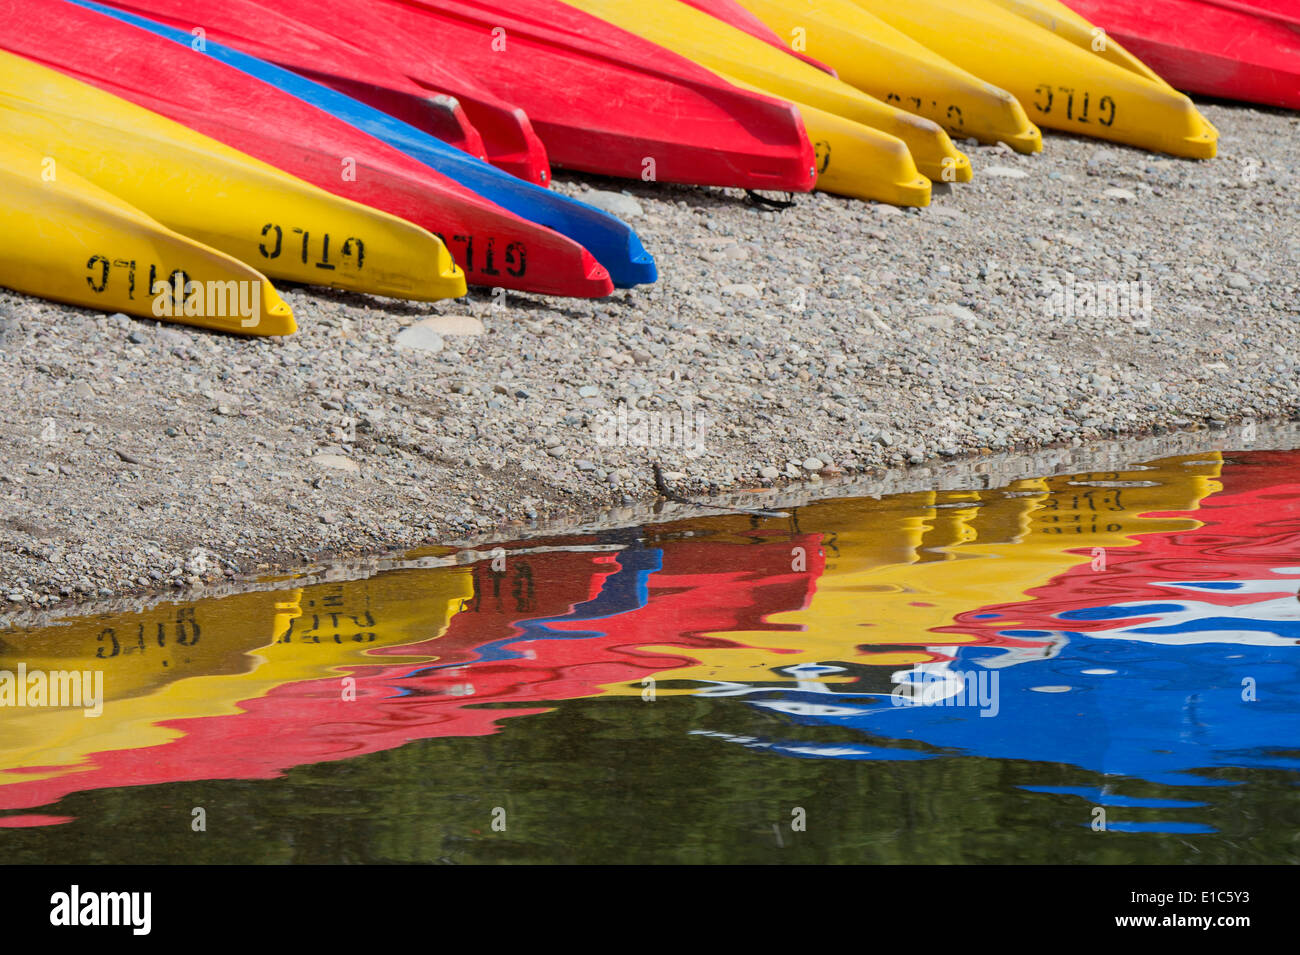 Kayaks for hire, laid out on the shores of Colter Bay at Jackson lake in the Grand Teton National Park. Stock Photo